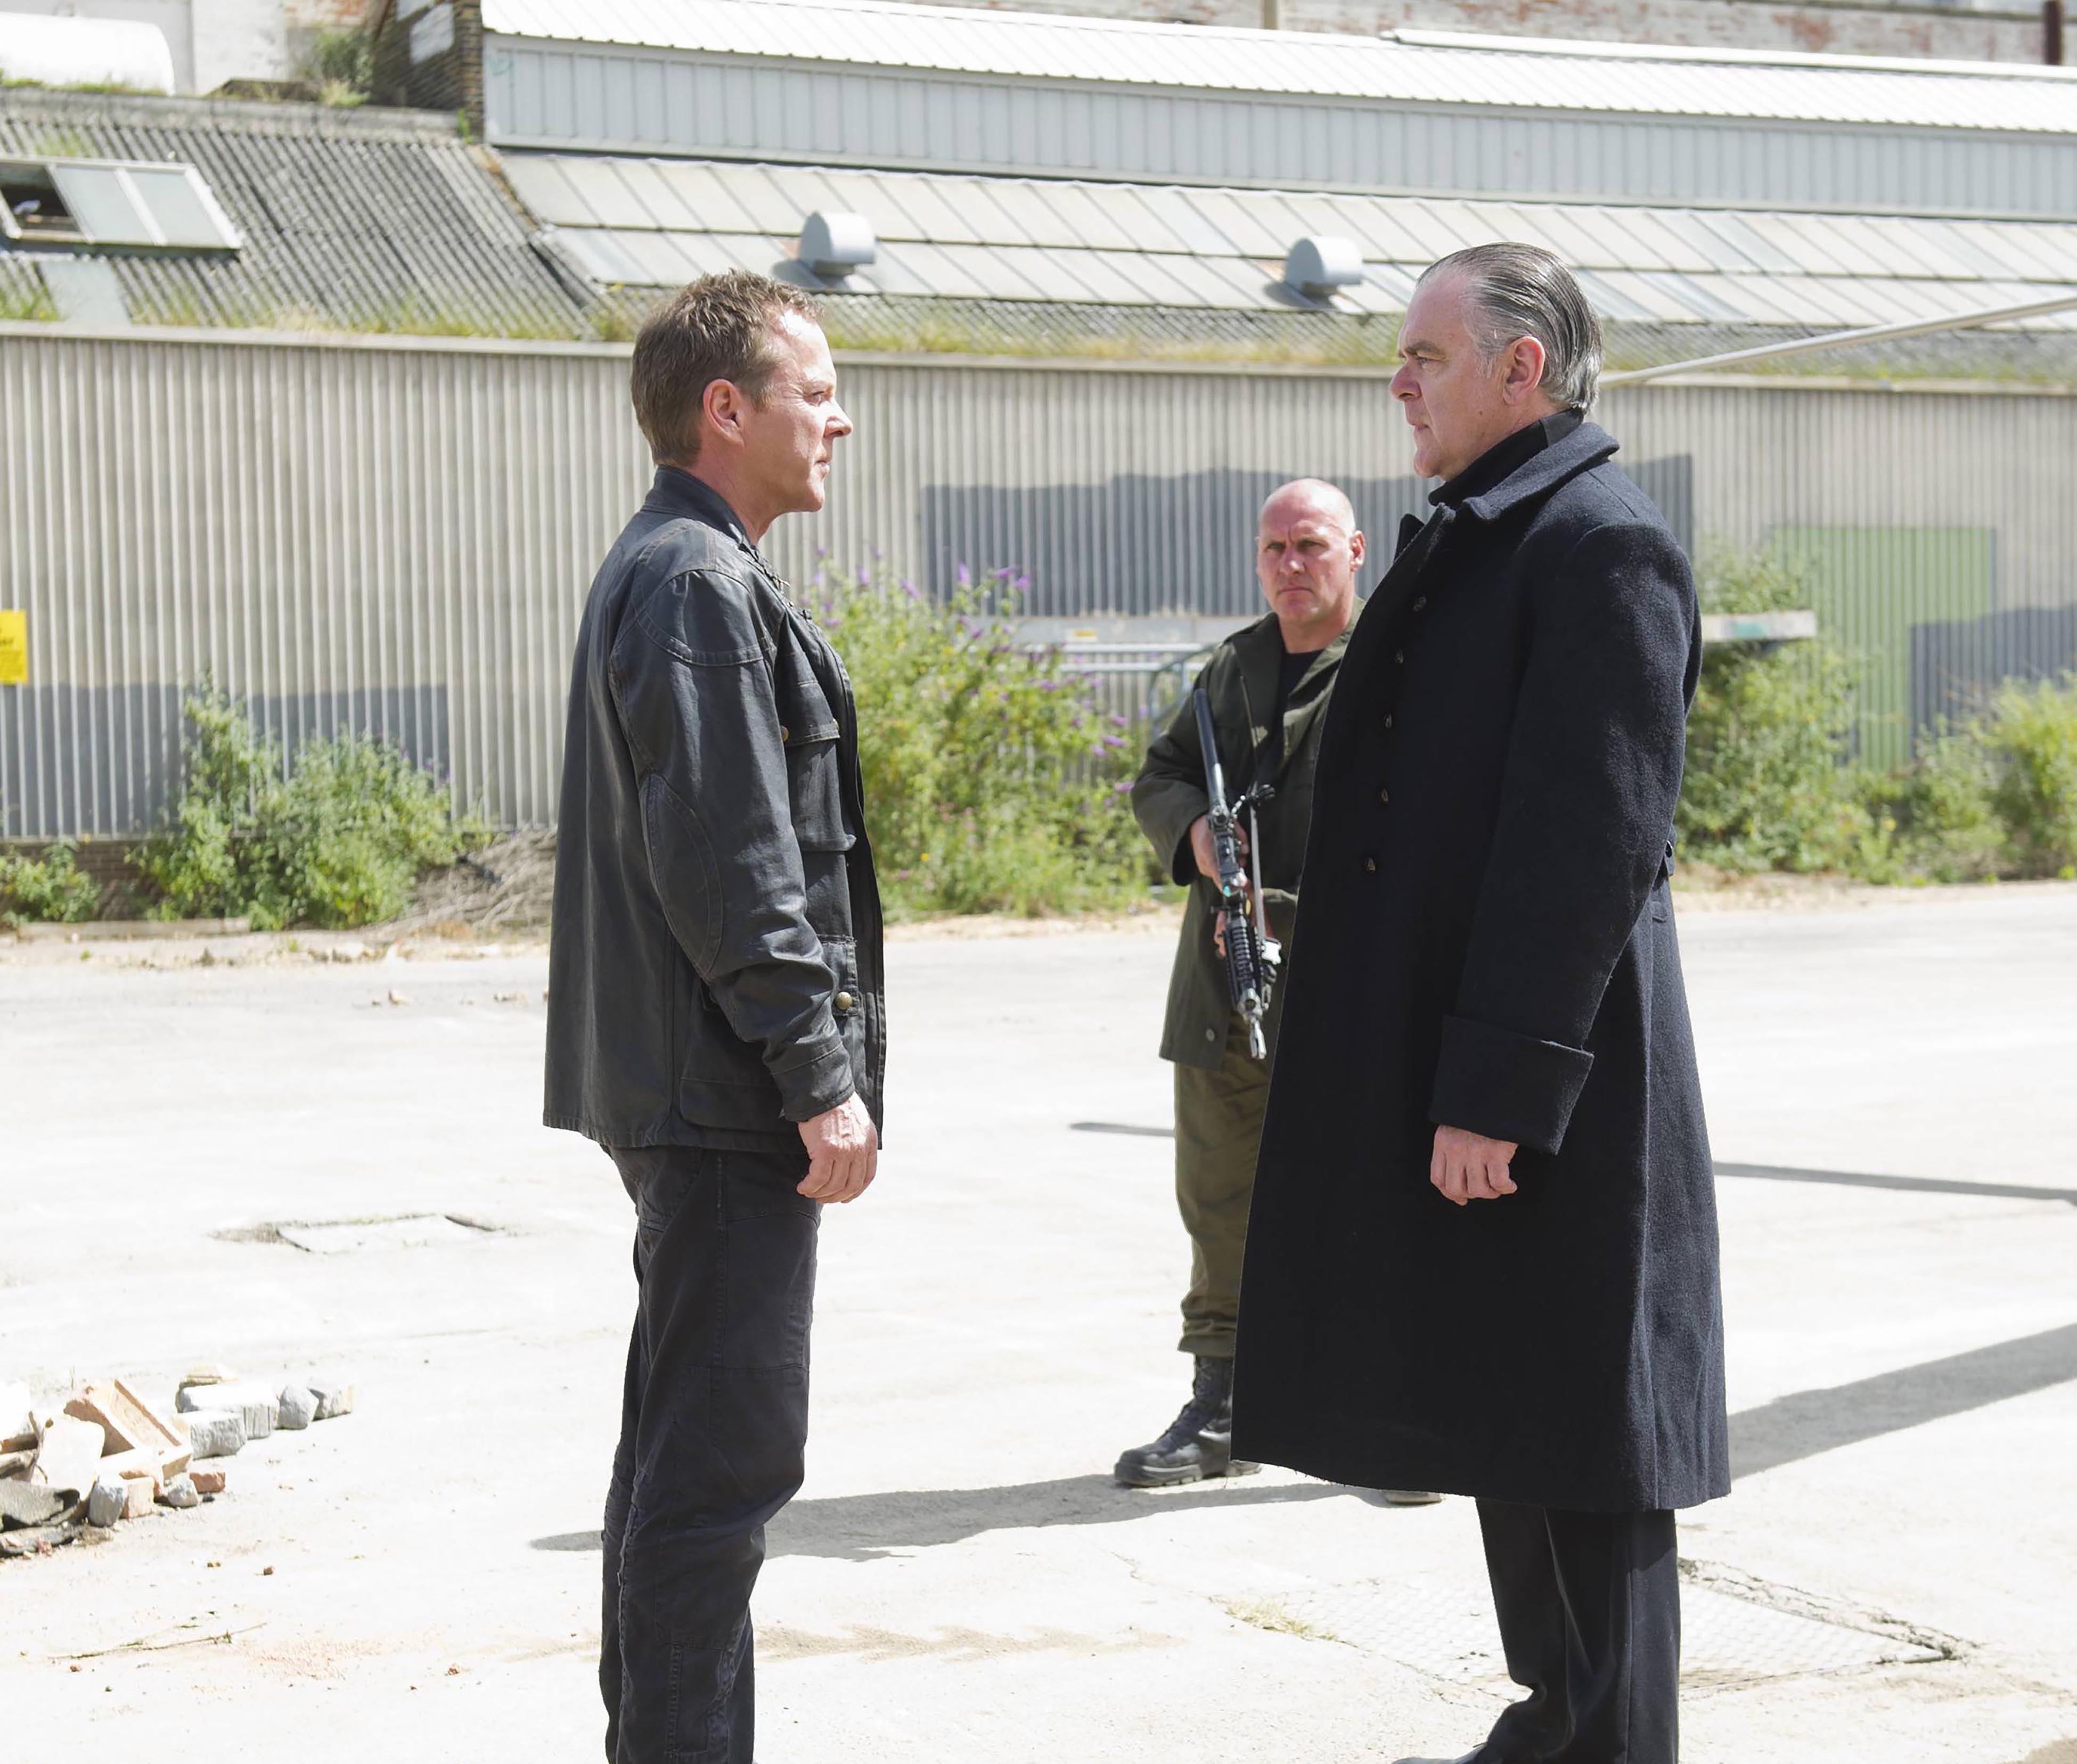 Jack-Bauer-Kiefer-Sutherland-Russian-24-Live-Another-Day-Episode-12-Finale.jpg